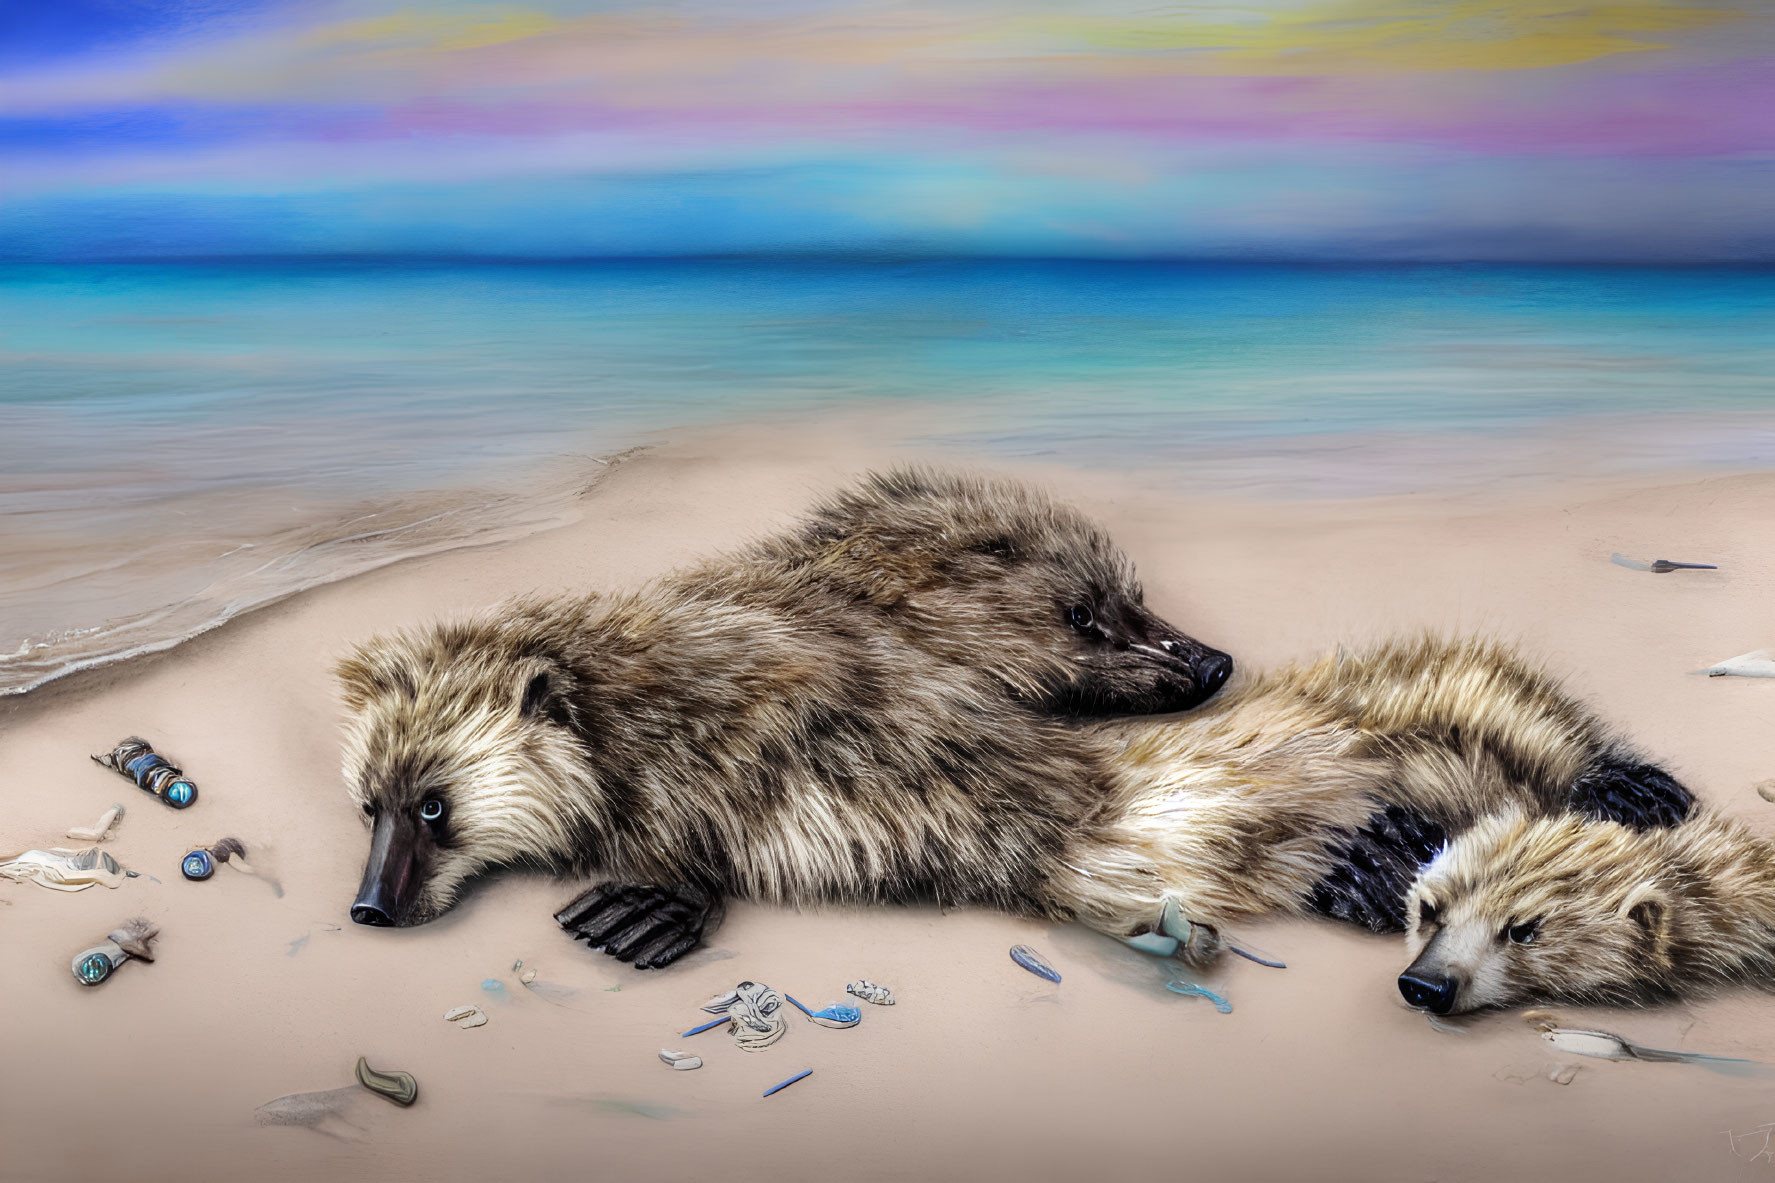 Raccoons on polluted beach with colorful skies and waste.